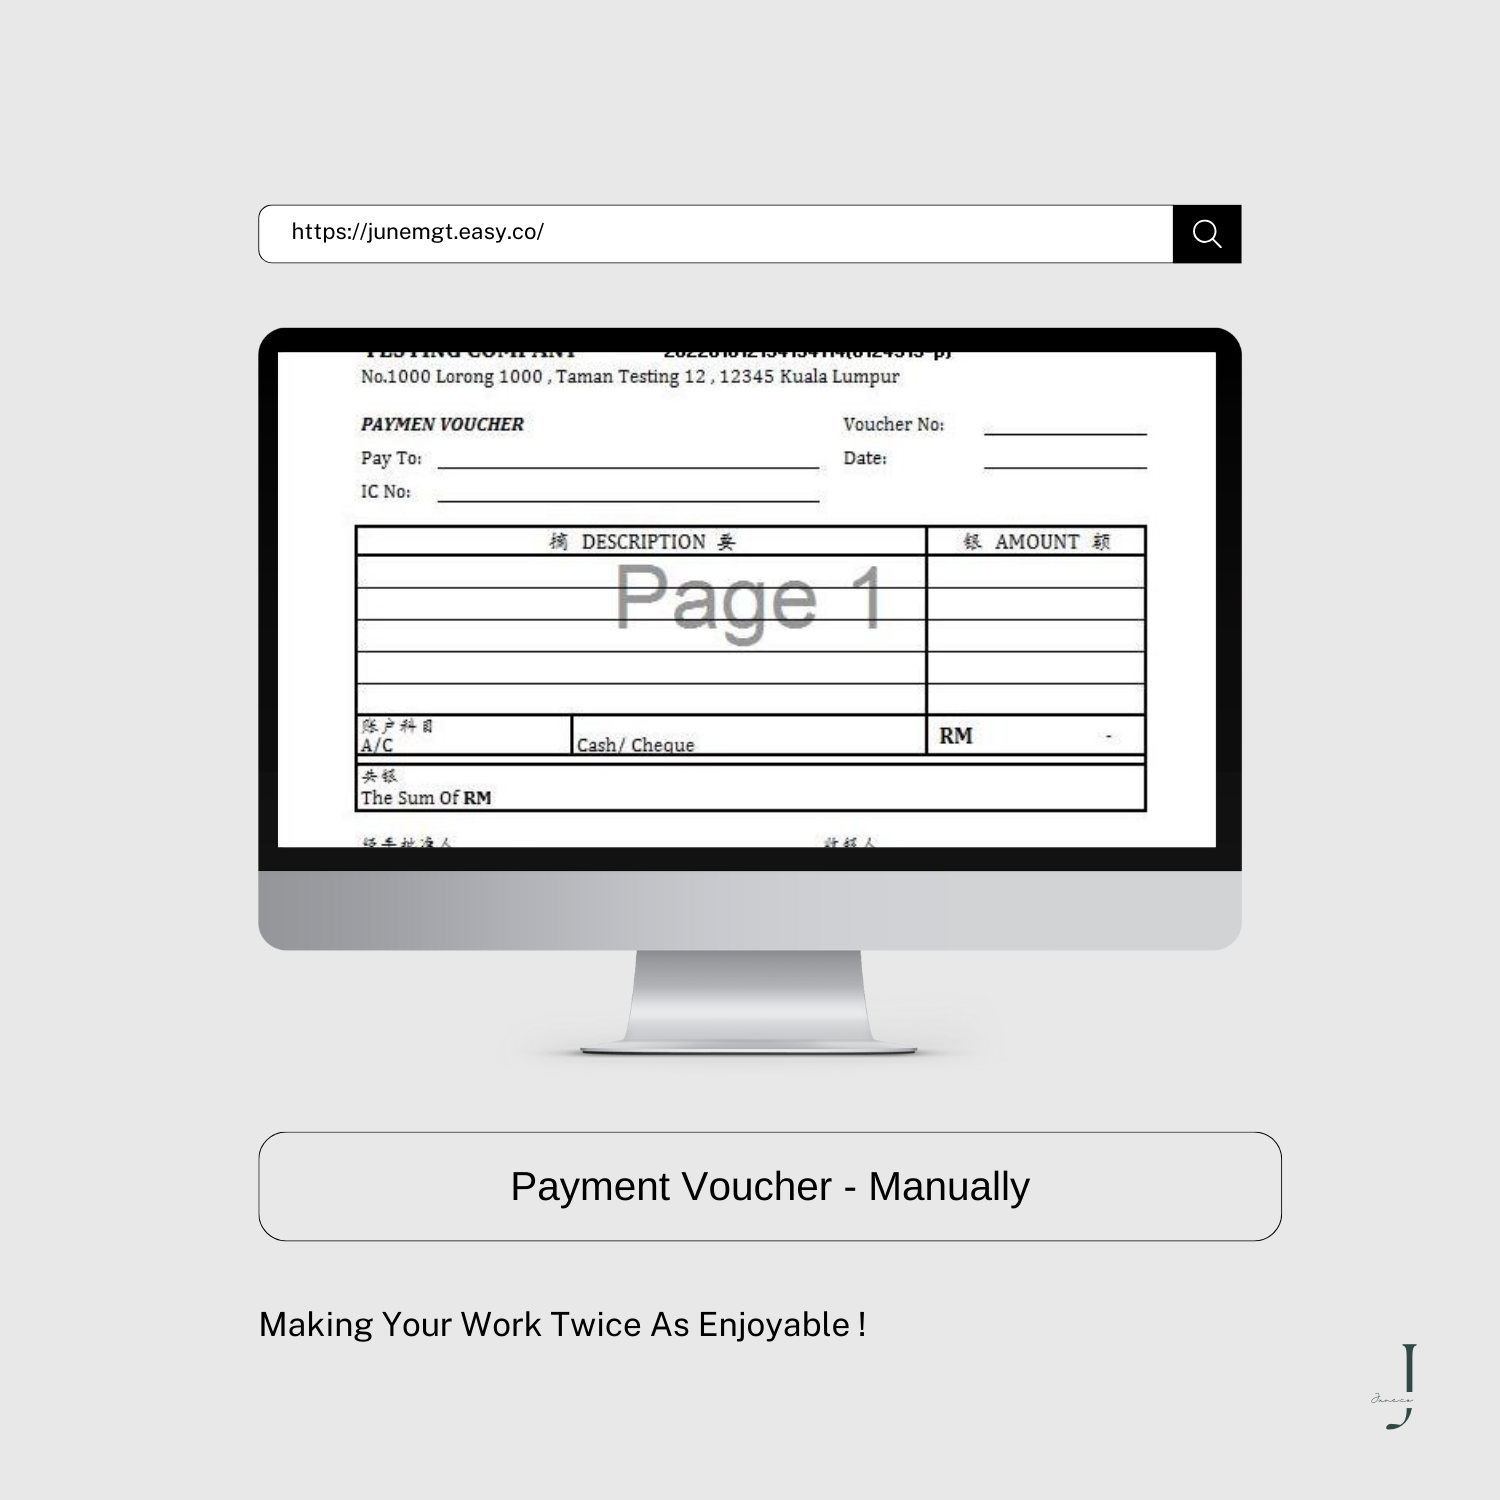 pymt voucher Manually product